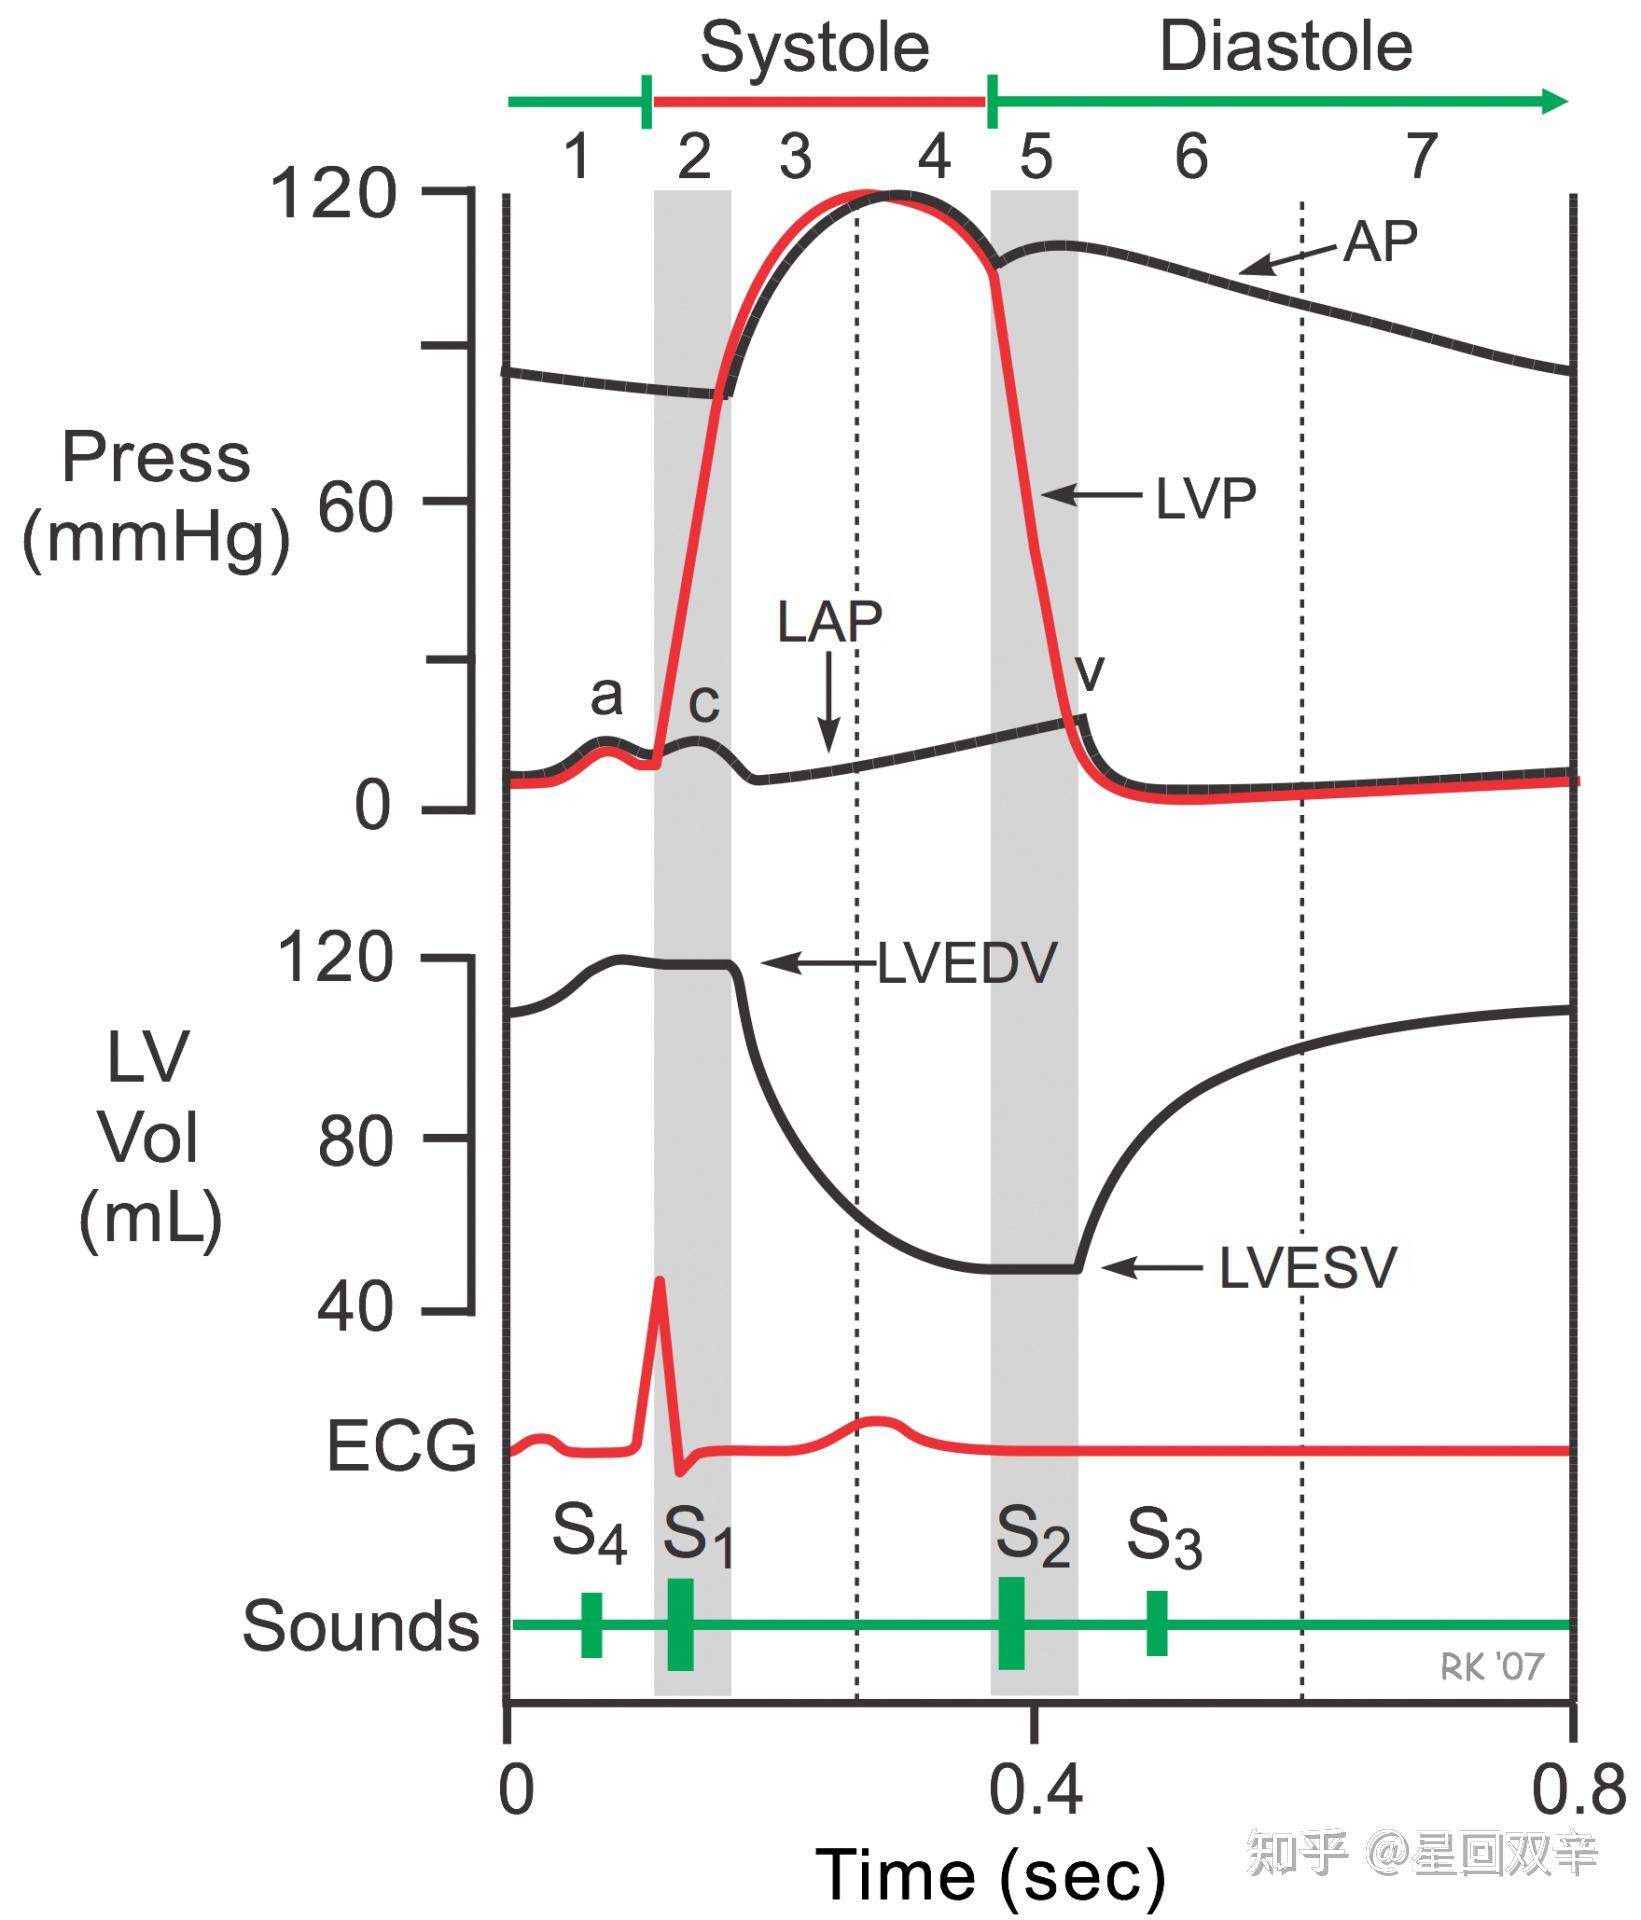 ventricular contraction timing